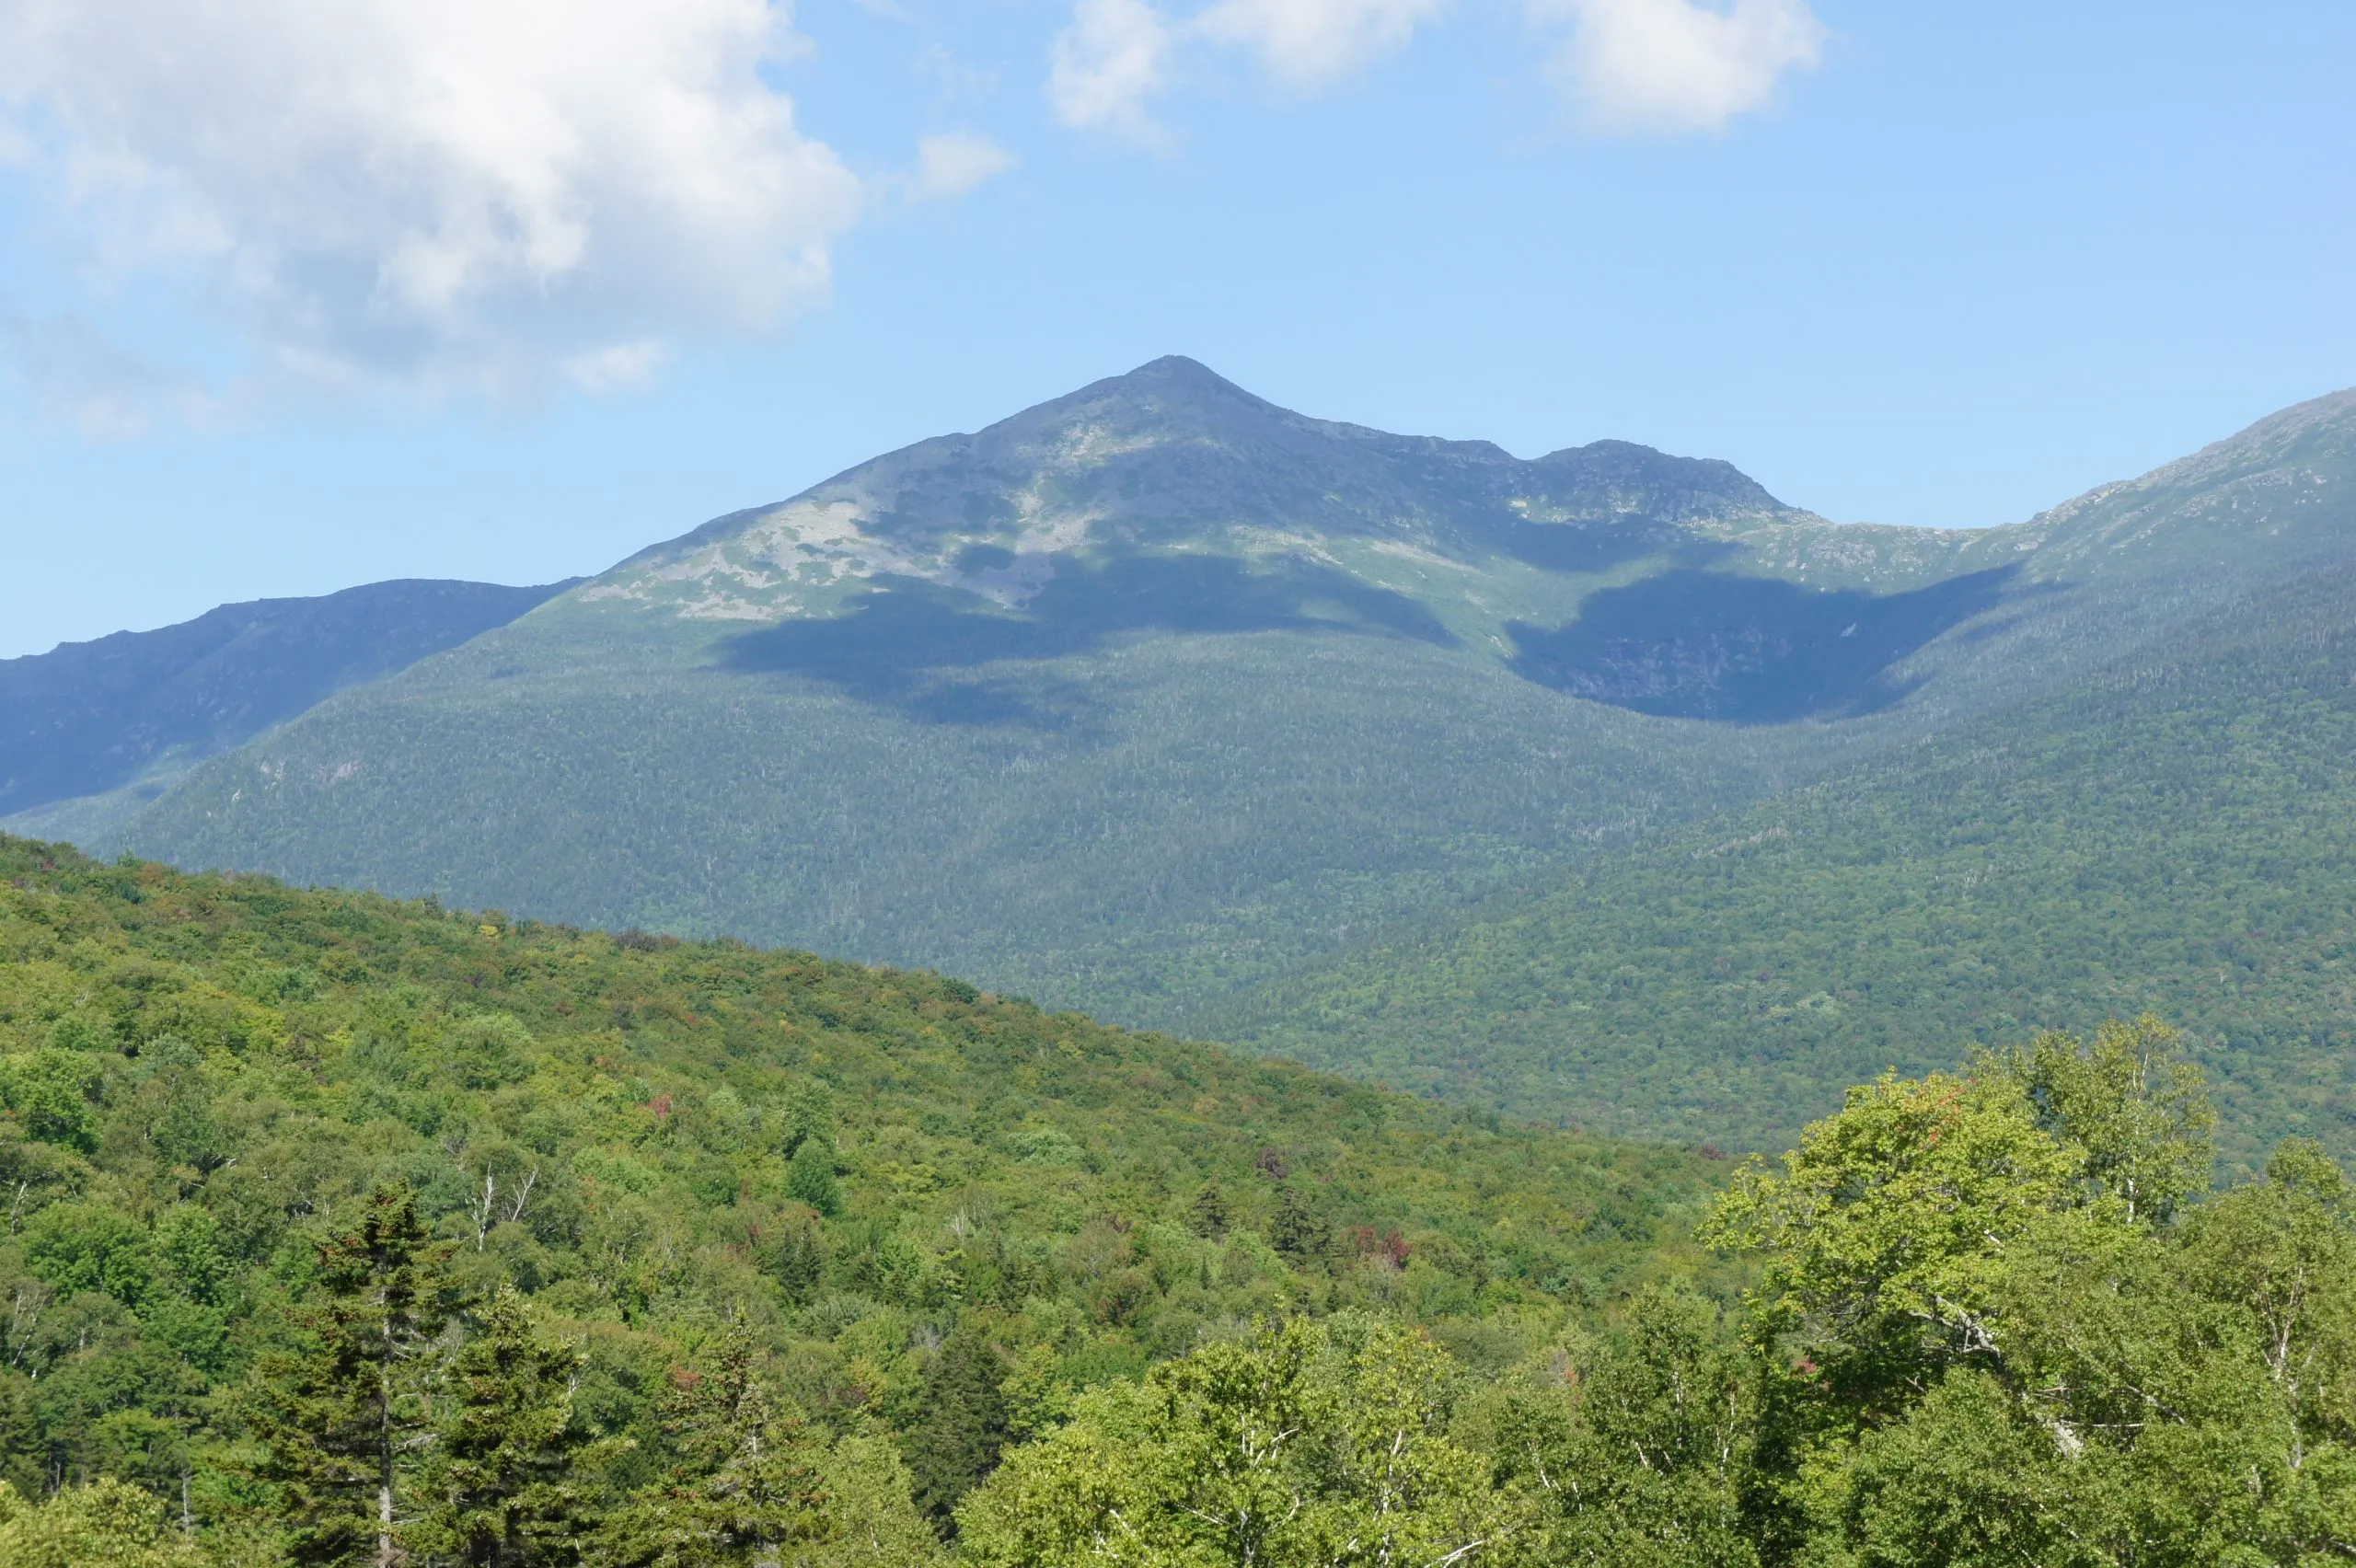 A view on the way up to the summit of Mt. Washington in Gorham, NH.